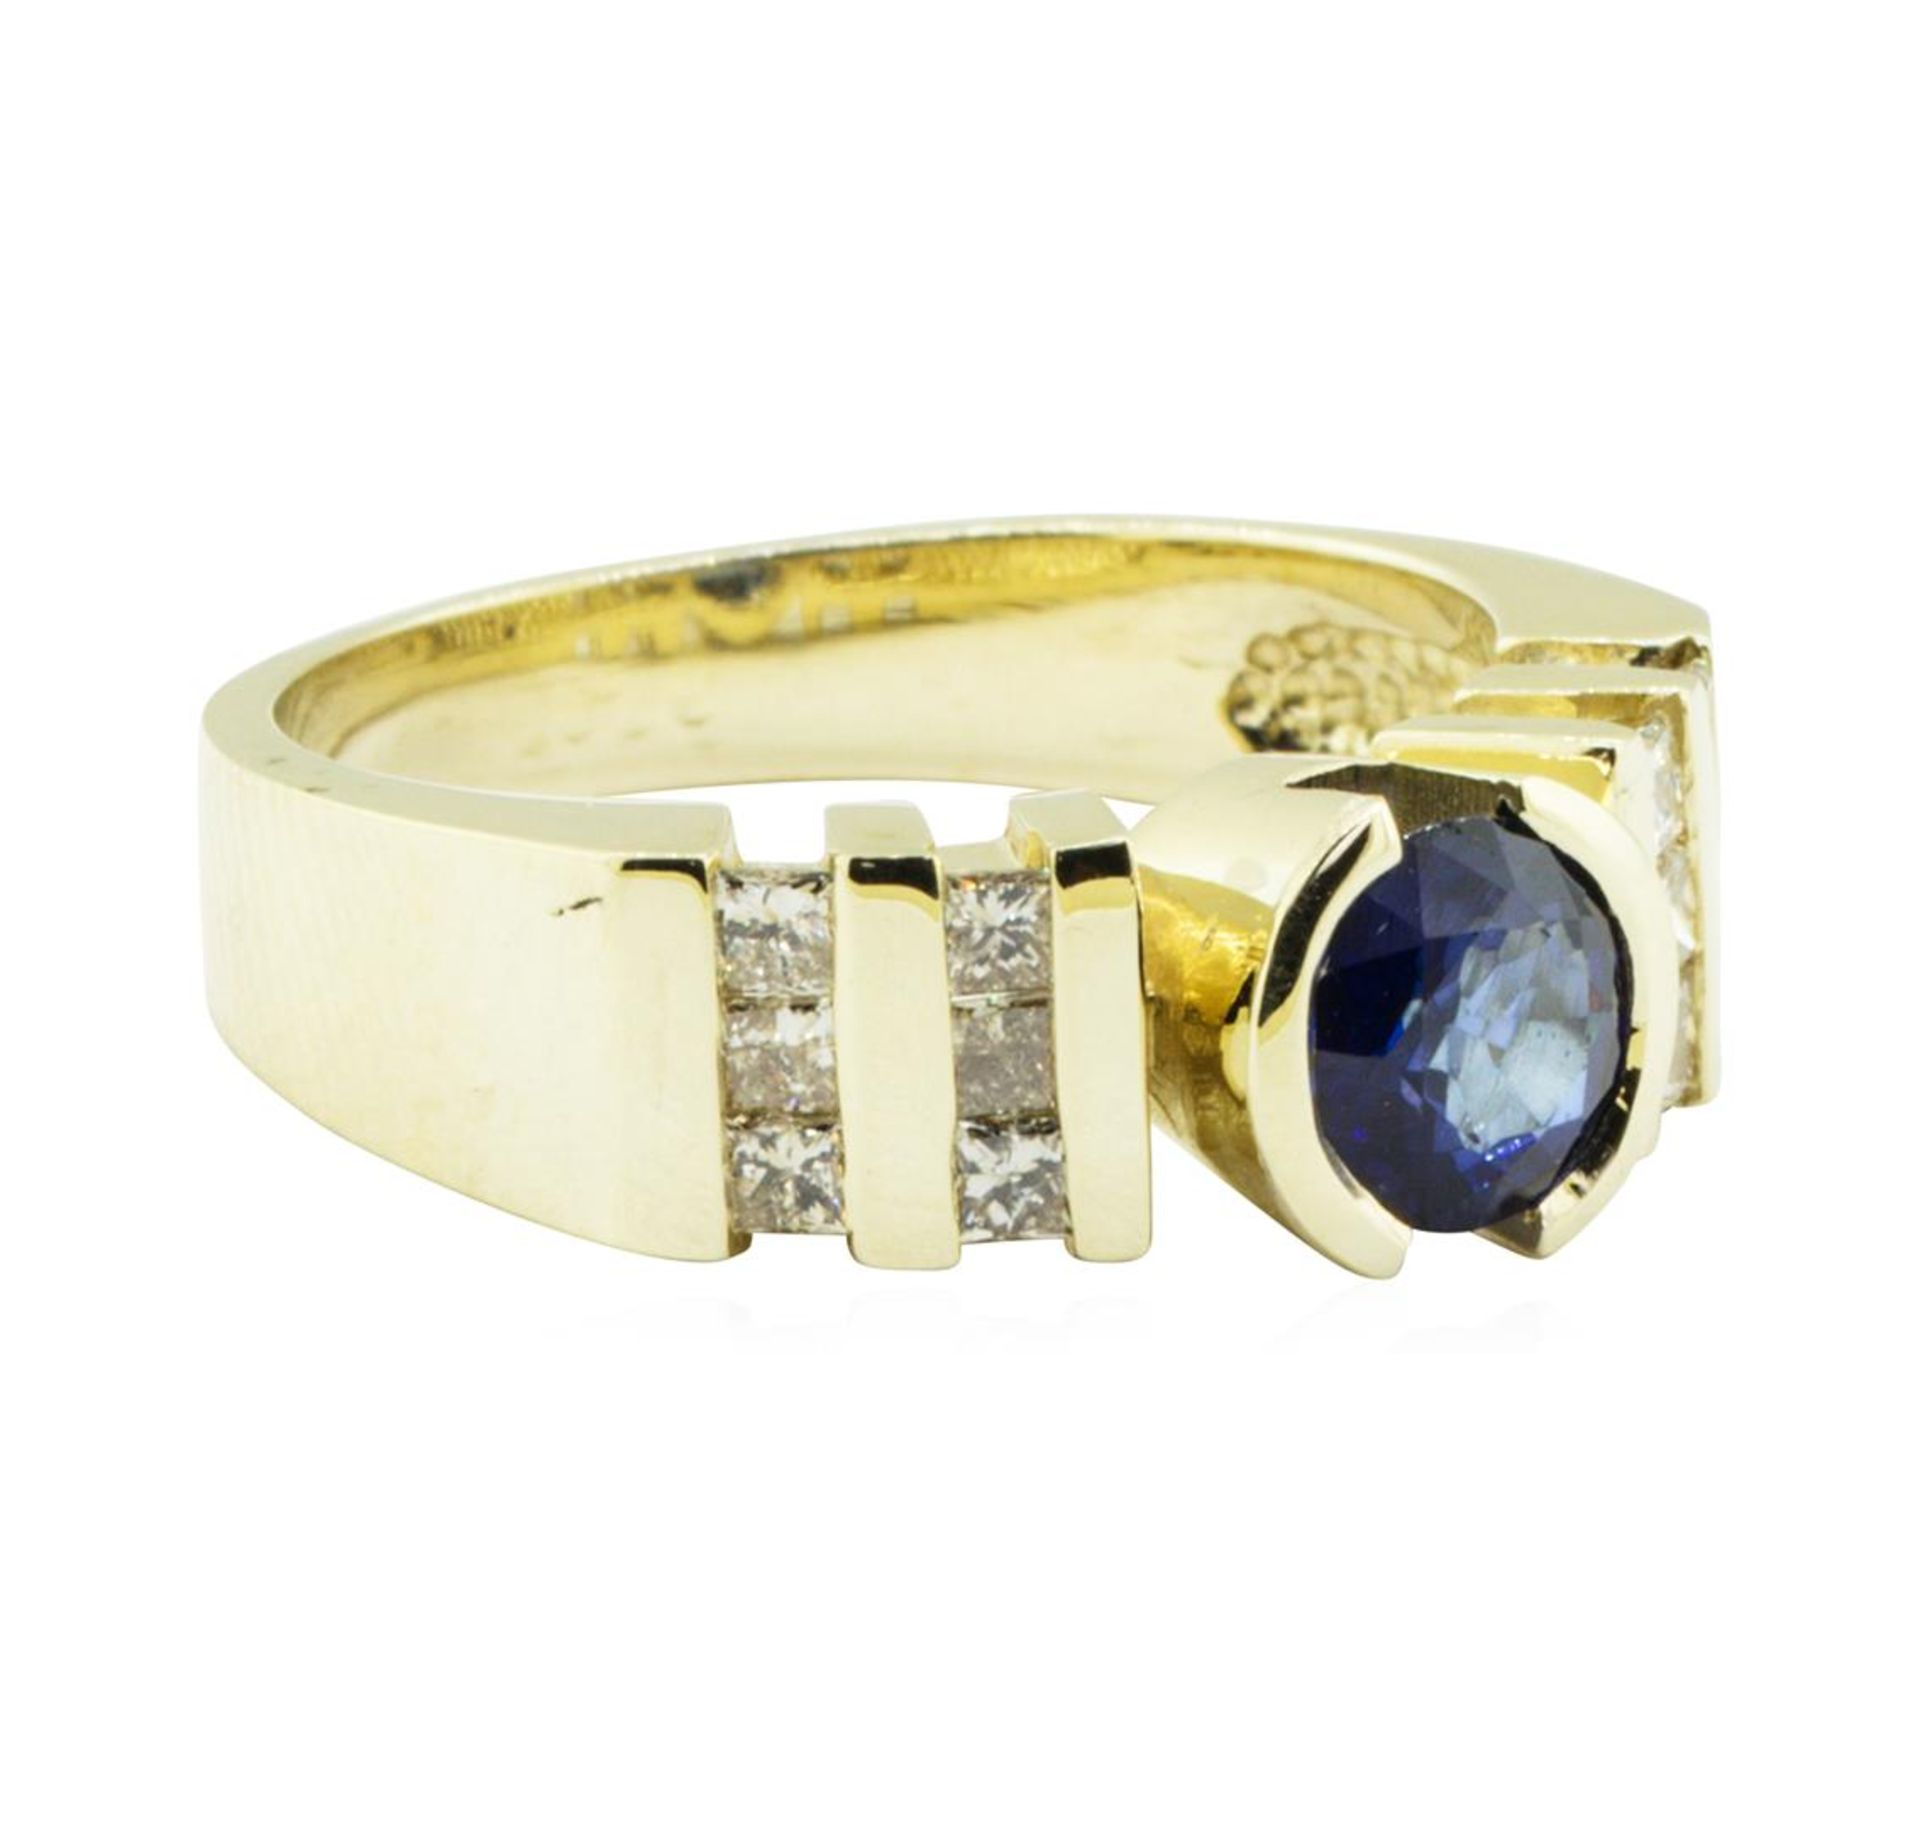 1.45ctw Blue Sapphire and Diamond Ring - 14KT Yellow Gold